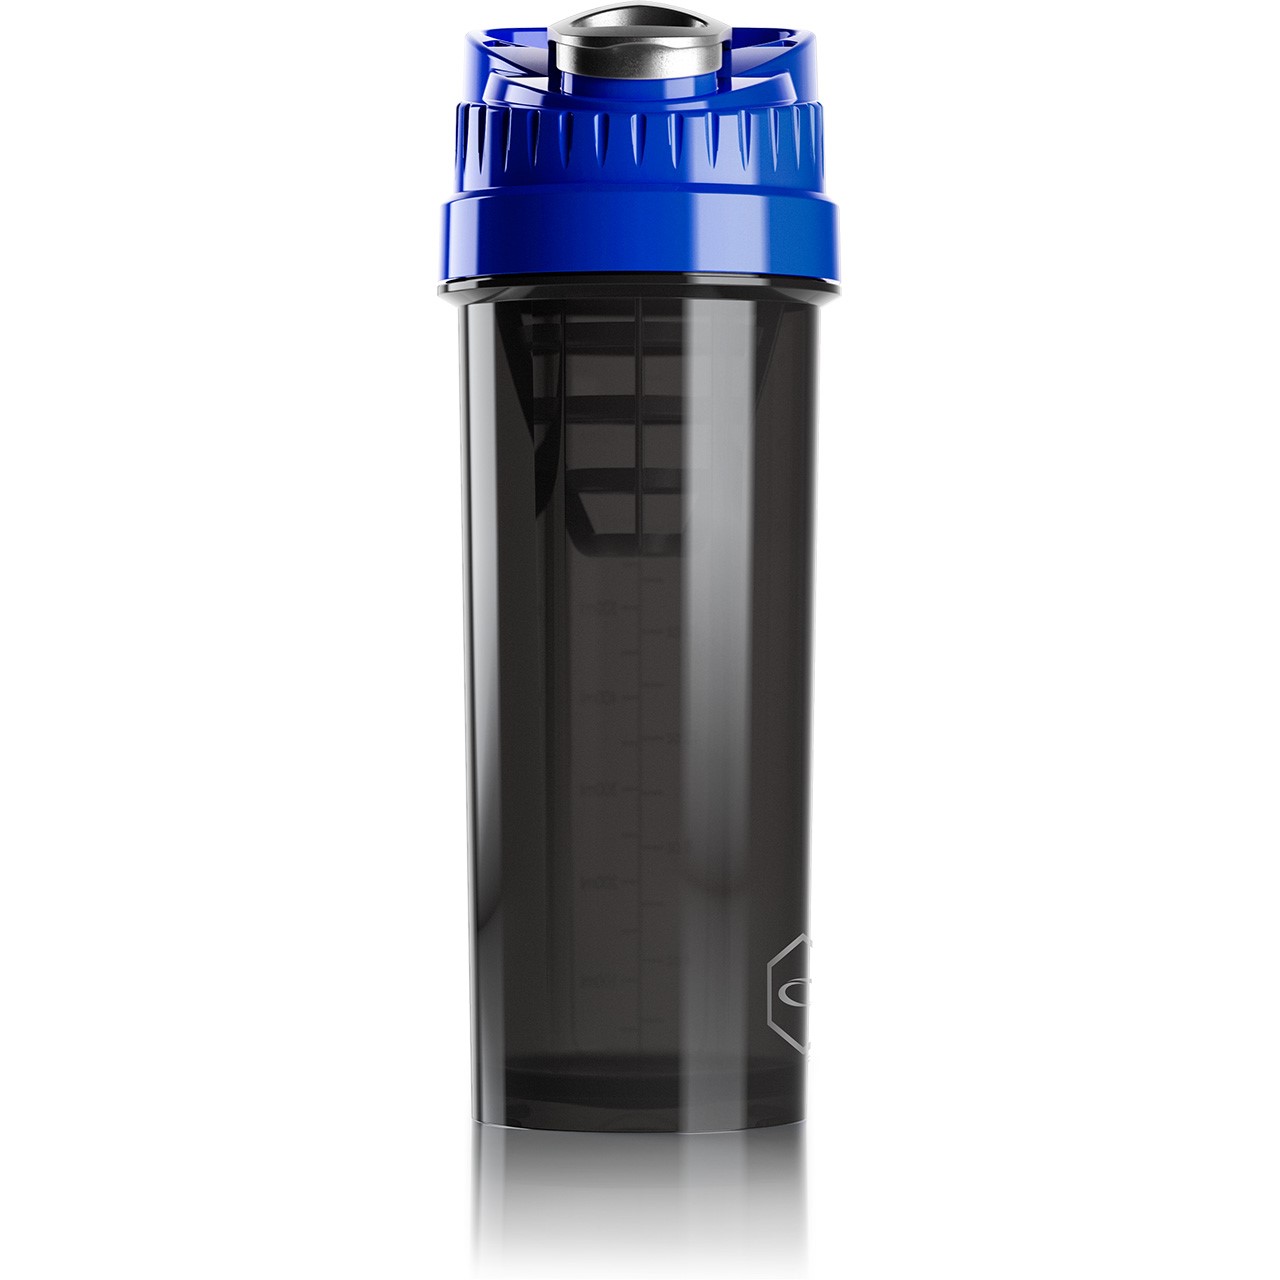 New Protein Shaker Cyclone Cup Dark Blue 950 ml